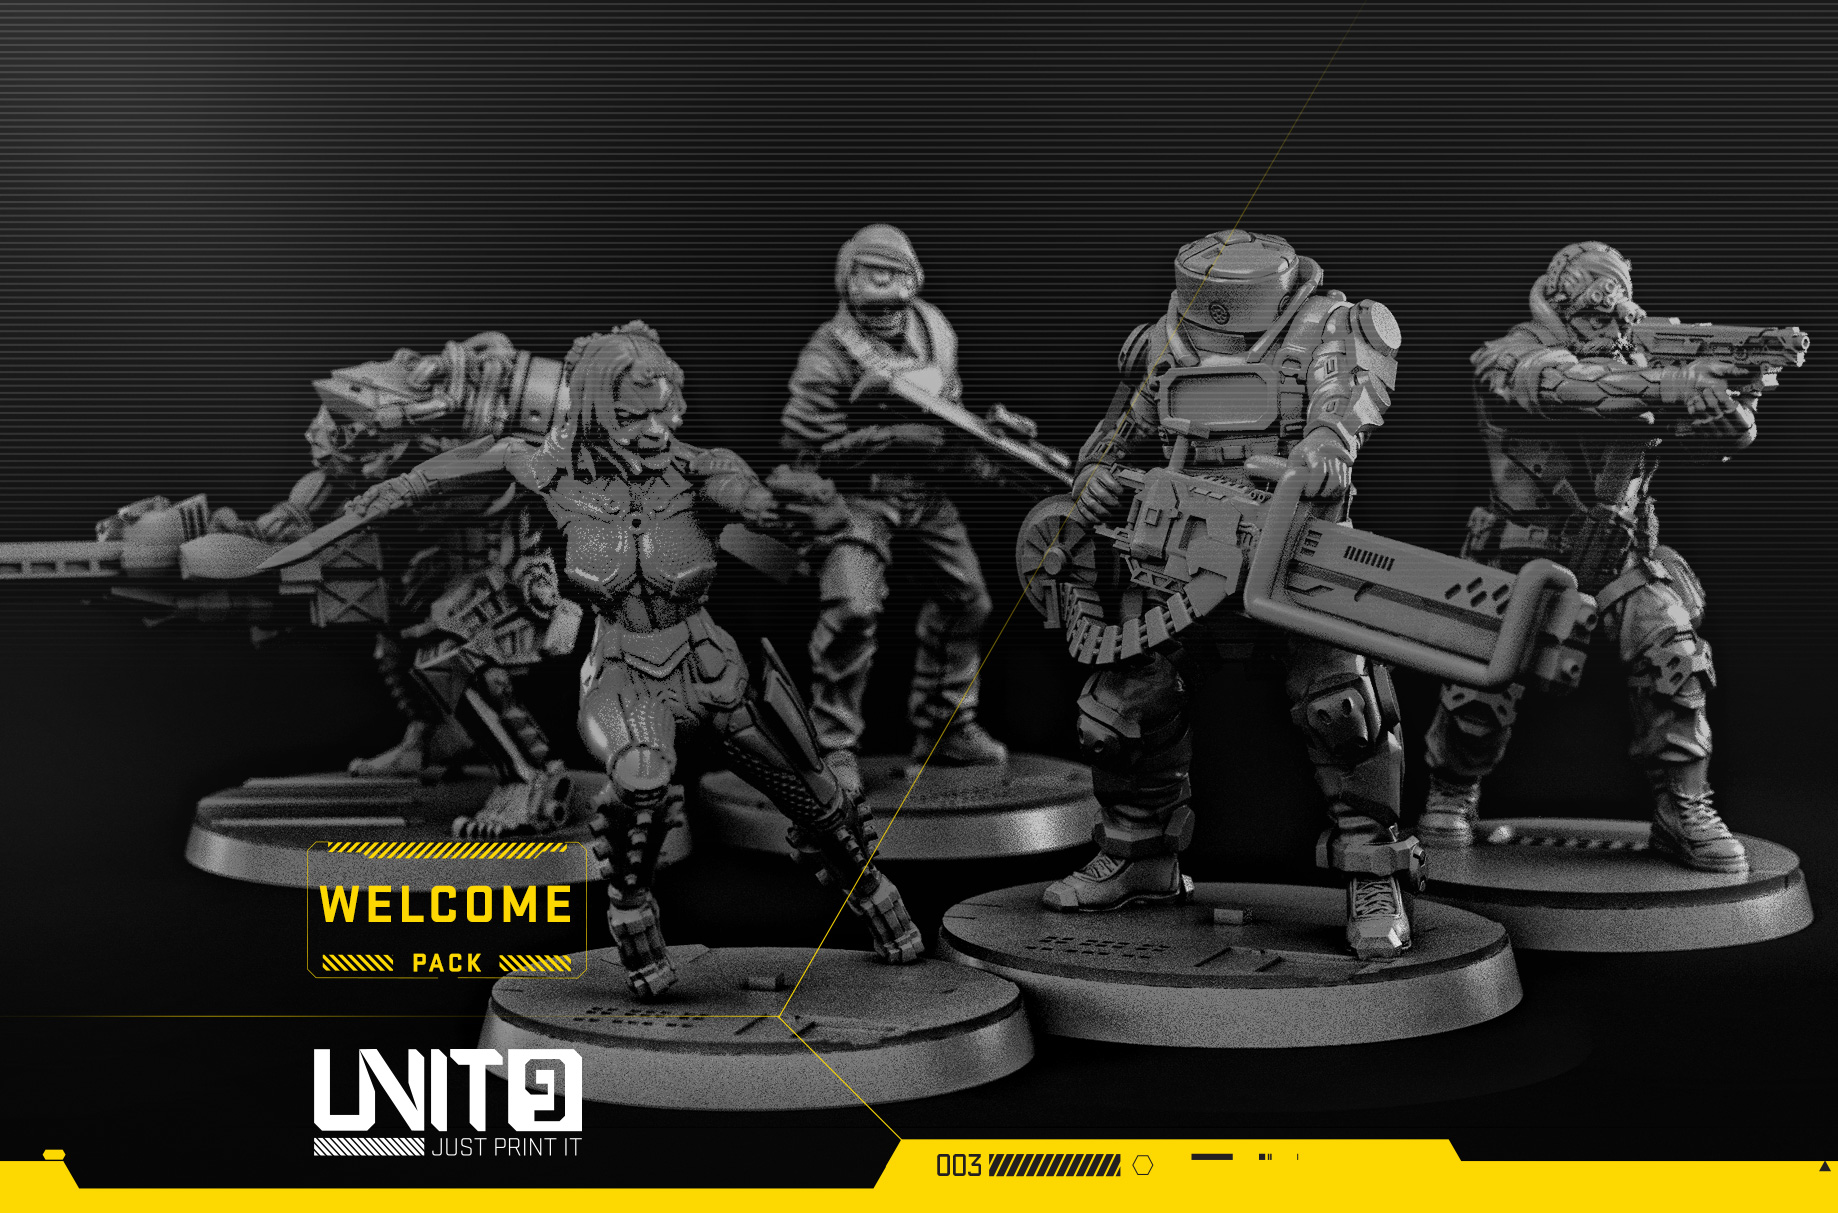 UNIT9 – new Patreon with cyberpunk miniatures